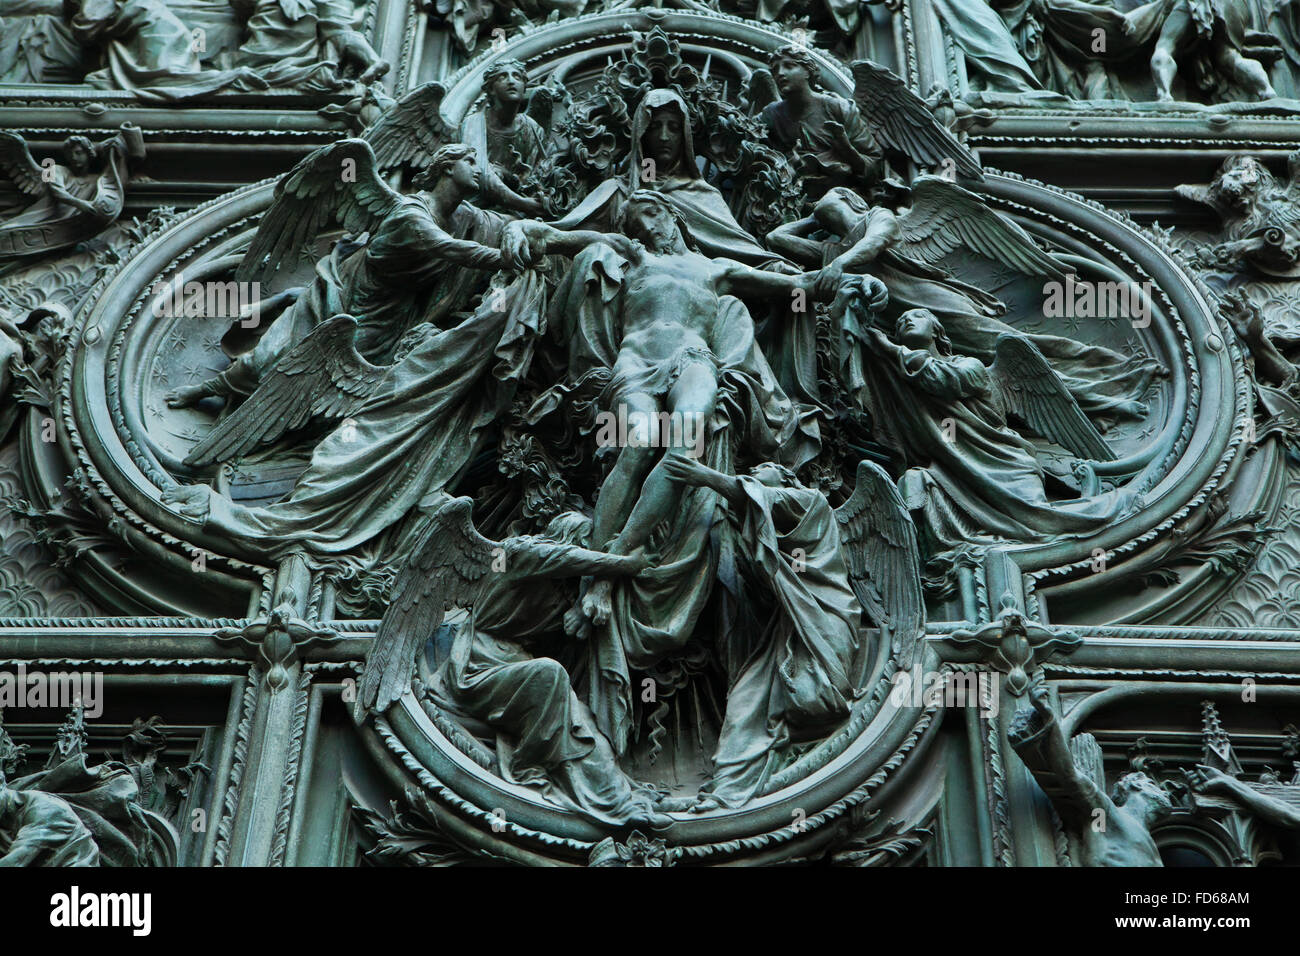 Ascension of Jesus. Detail of the main bronze door of the Milan Cathedral (Duomo di Milano) in Milan, Italy. The bronze door was designed by Italian sculptor Ludovico Pogliaghi in 1894-1908. Stock Photo